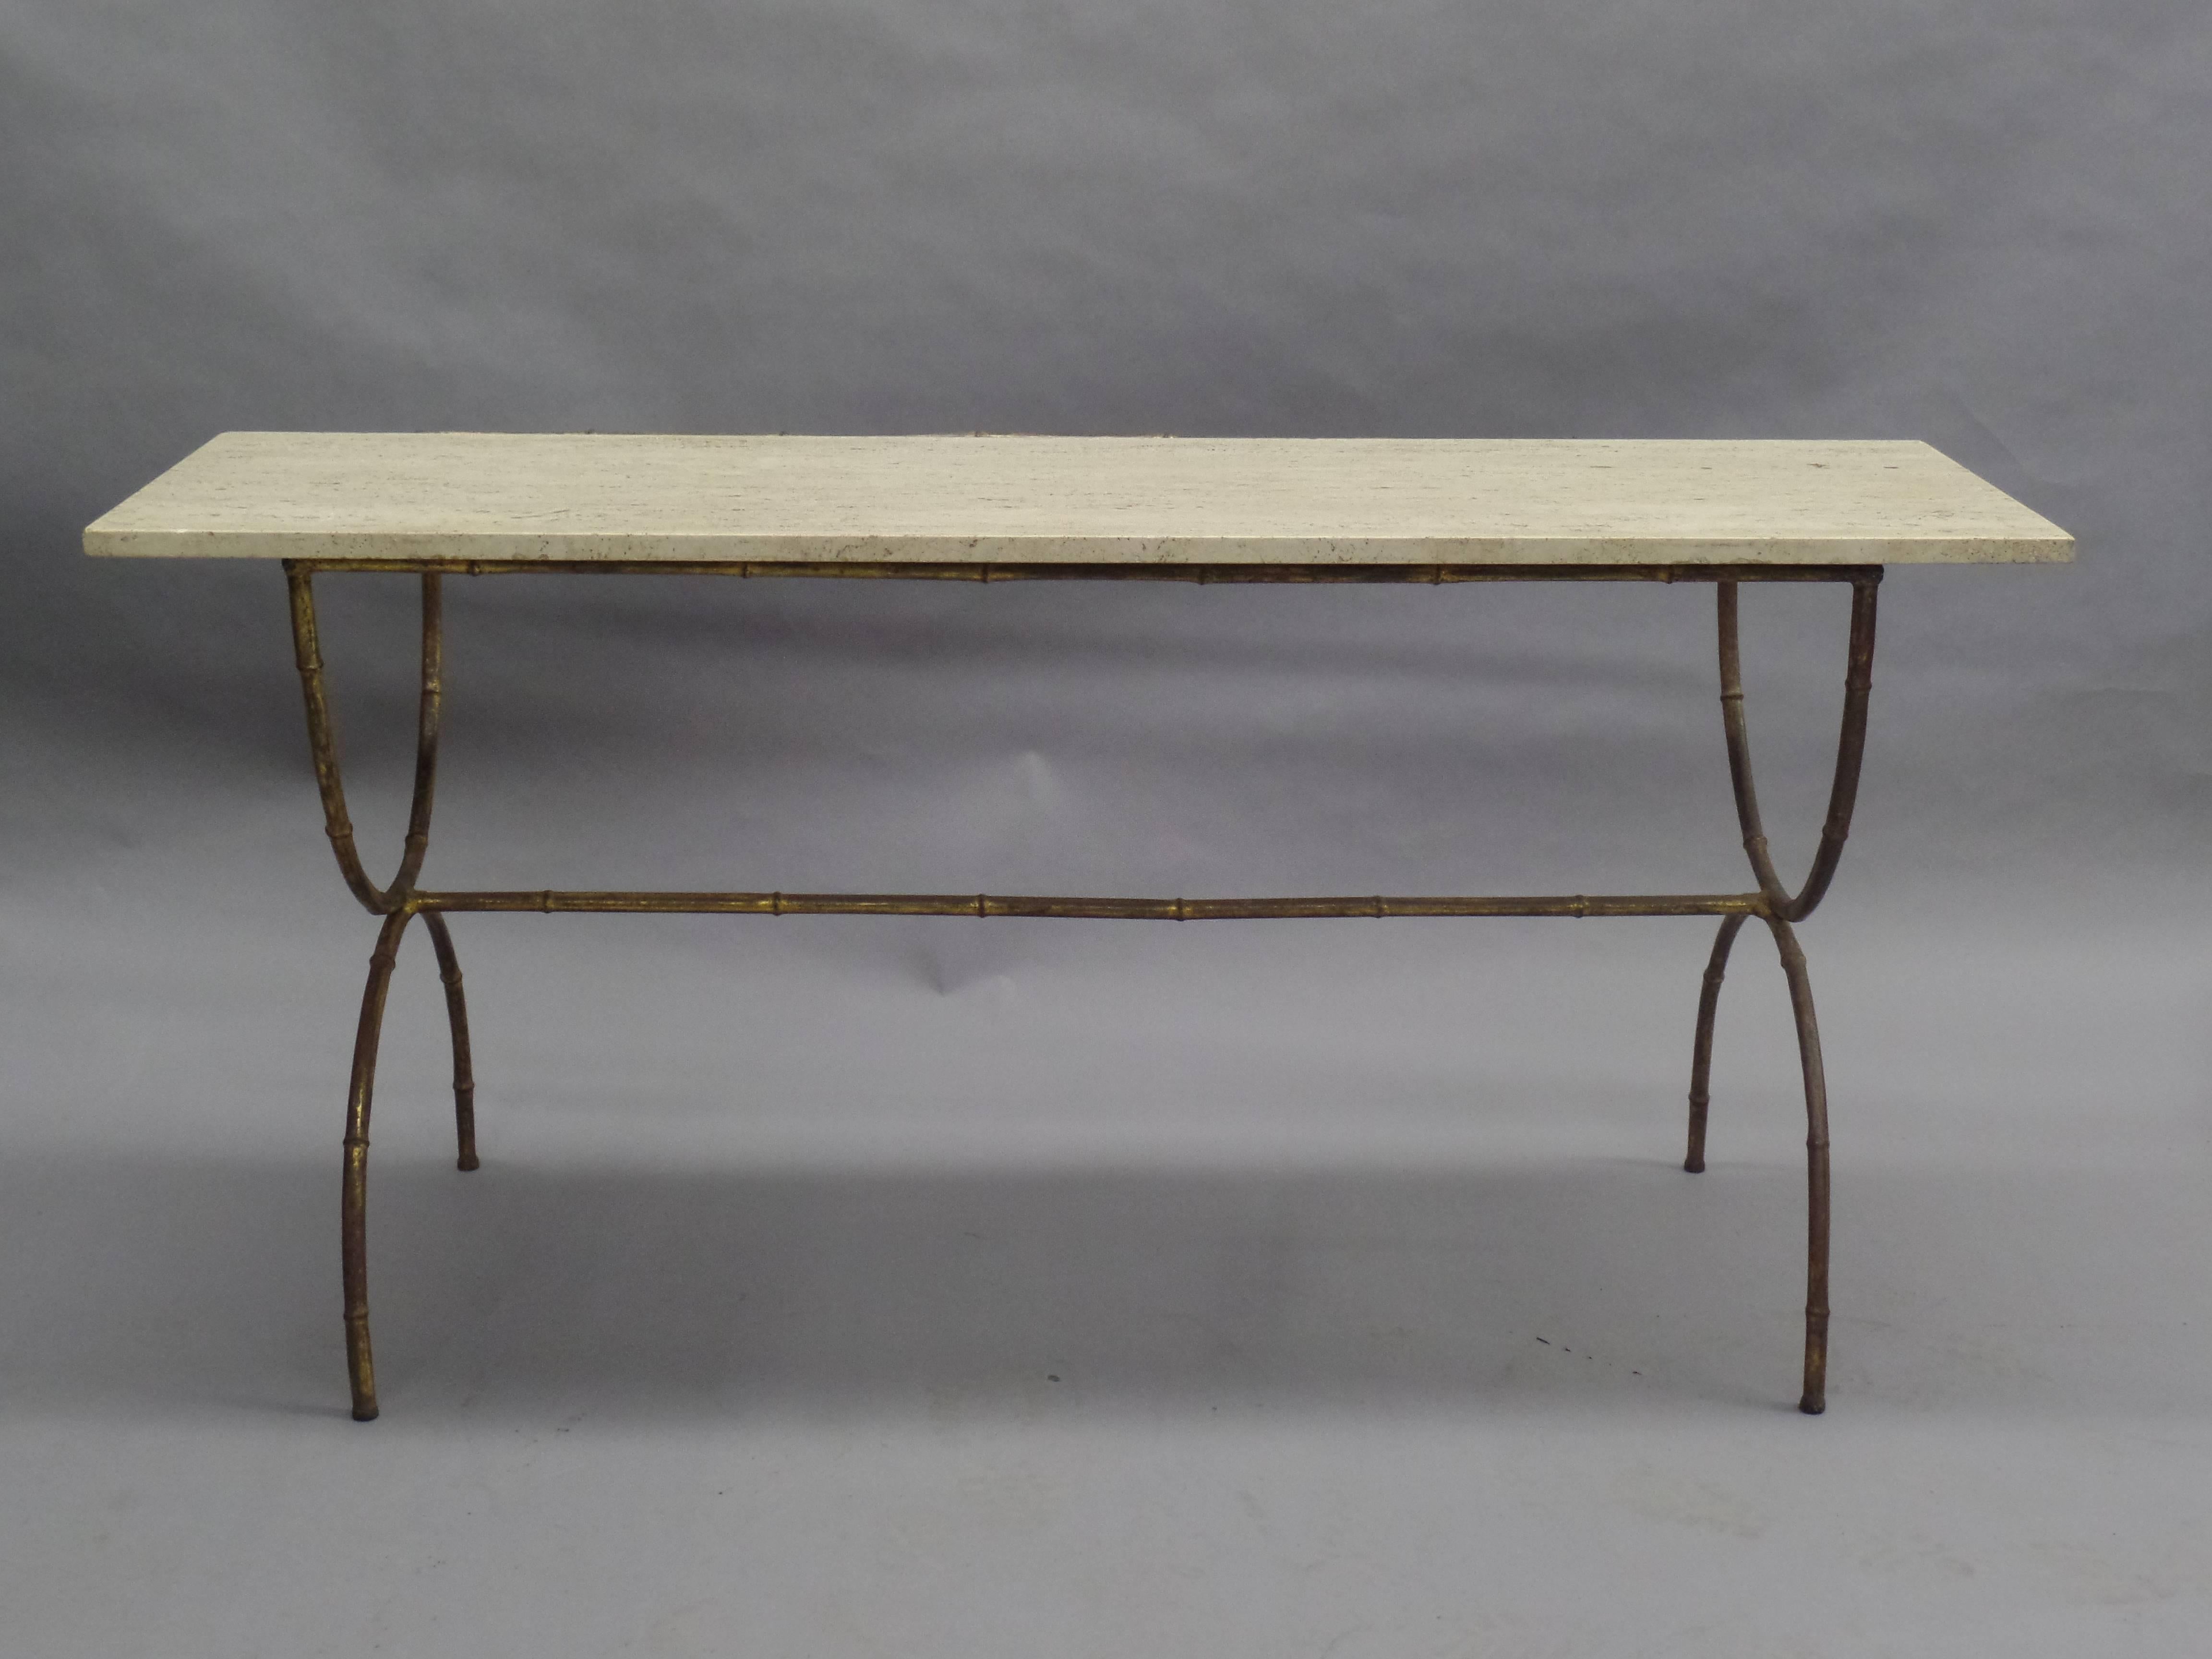 Elegant French Mid-Century Modern neoclassical sofa table, console or vanity in gilt faux bamboo by Maison Baguès. The table is designed in a modern neoclassical curile form with X-frame legs and a center stretcher uniting the legs. Top of calicatta